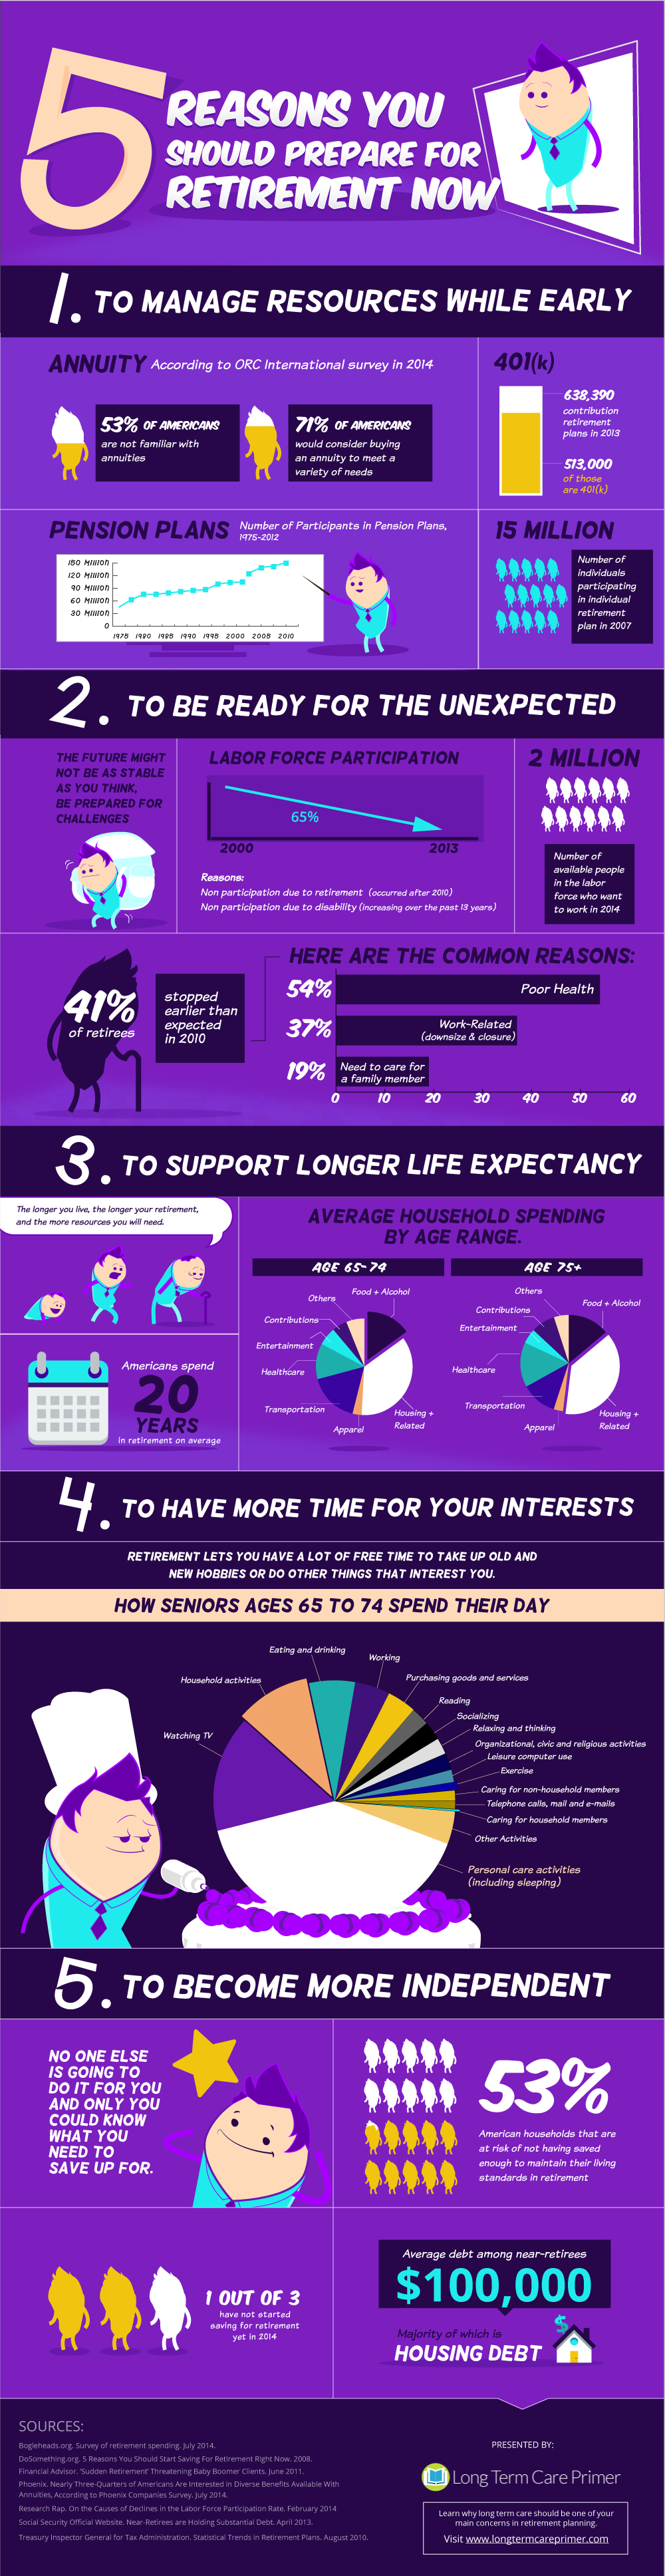 Infographic: 5 Reasons You Should Prepare for Retirement Now